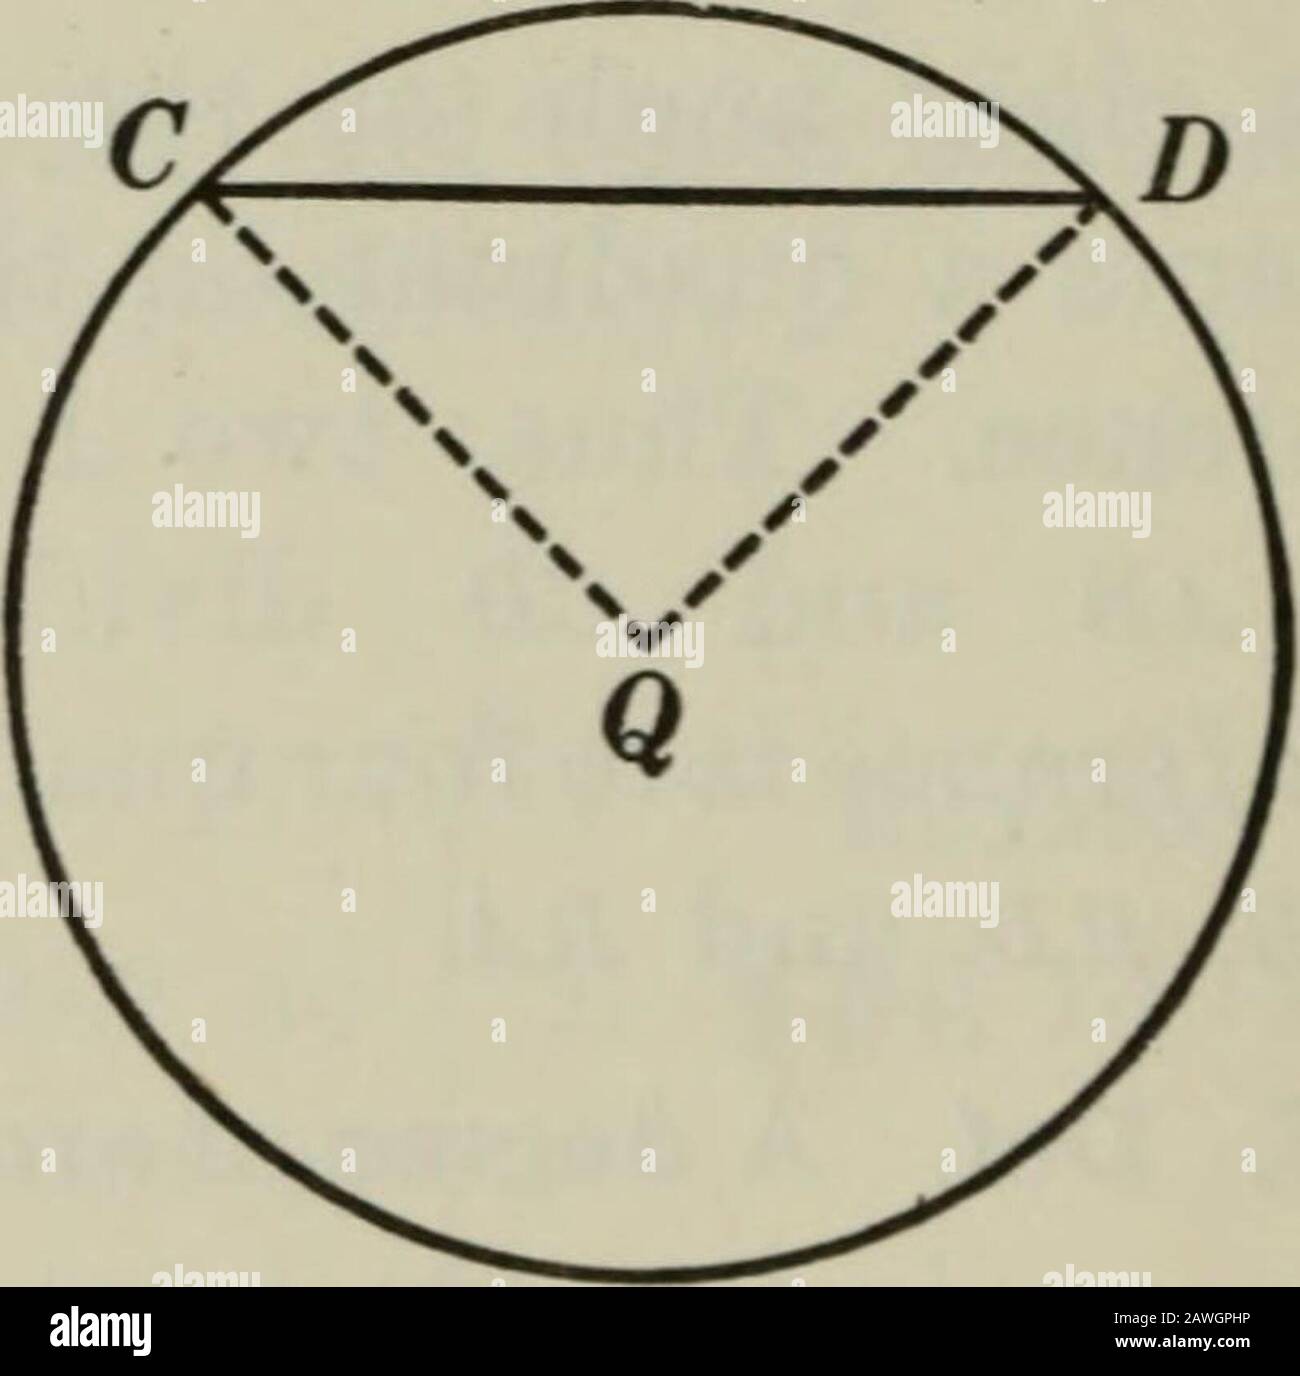 Plane and solid geometry . I. Given equal circles 0 and Q, with equal chords AB and CDTo prove AB = CD, Argument 1. Draw radii OA, OB, QC, QD, 2. In A OAB and QCD, AB = CD. 3. OA = QC and OB = QD. 4. .-. A OAB = A QCD. 5. .-. Z 0 = Z Q. 6. .-. AB = CD. Q.E.D. Reasons 1. § 54, 15. 2. By hyp. 3. § 279, b, 4. §116. 5. §110. 6. § 293, I. BOOK II 119 II. Conversely : Given equal circles 0 and Q, and equal arcs AB and CB, To prove chord AB = chord CD. Argument1. Draw radii OA, OB, QC, QD. 2.3.4.5.6. AB = CD. .-. Aboa = Z.dqc. OA = QC and OB = QD. .-. A OAB = A QCD, .-. chord AB = chord CD. Q.E.D. Re Stock Photo